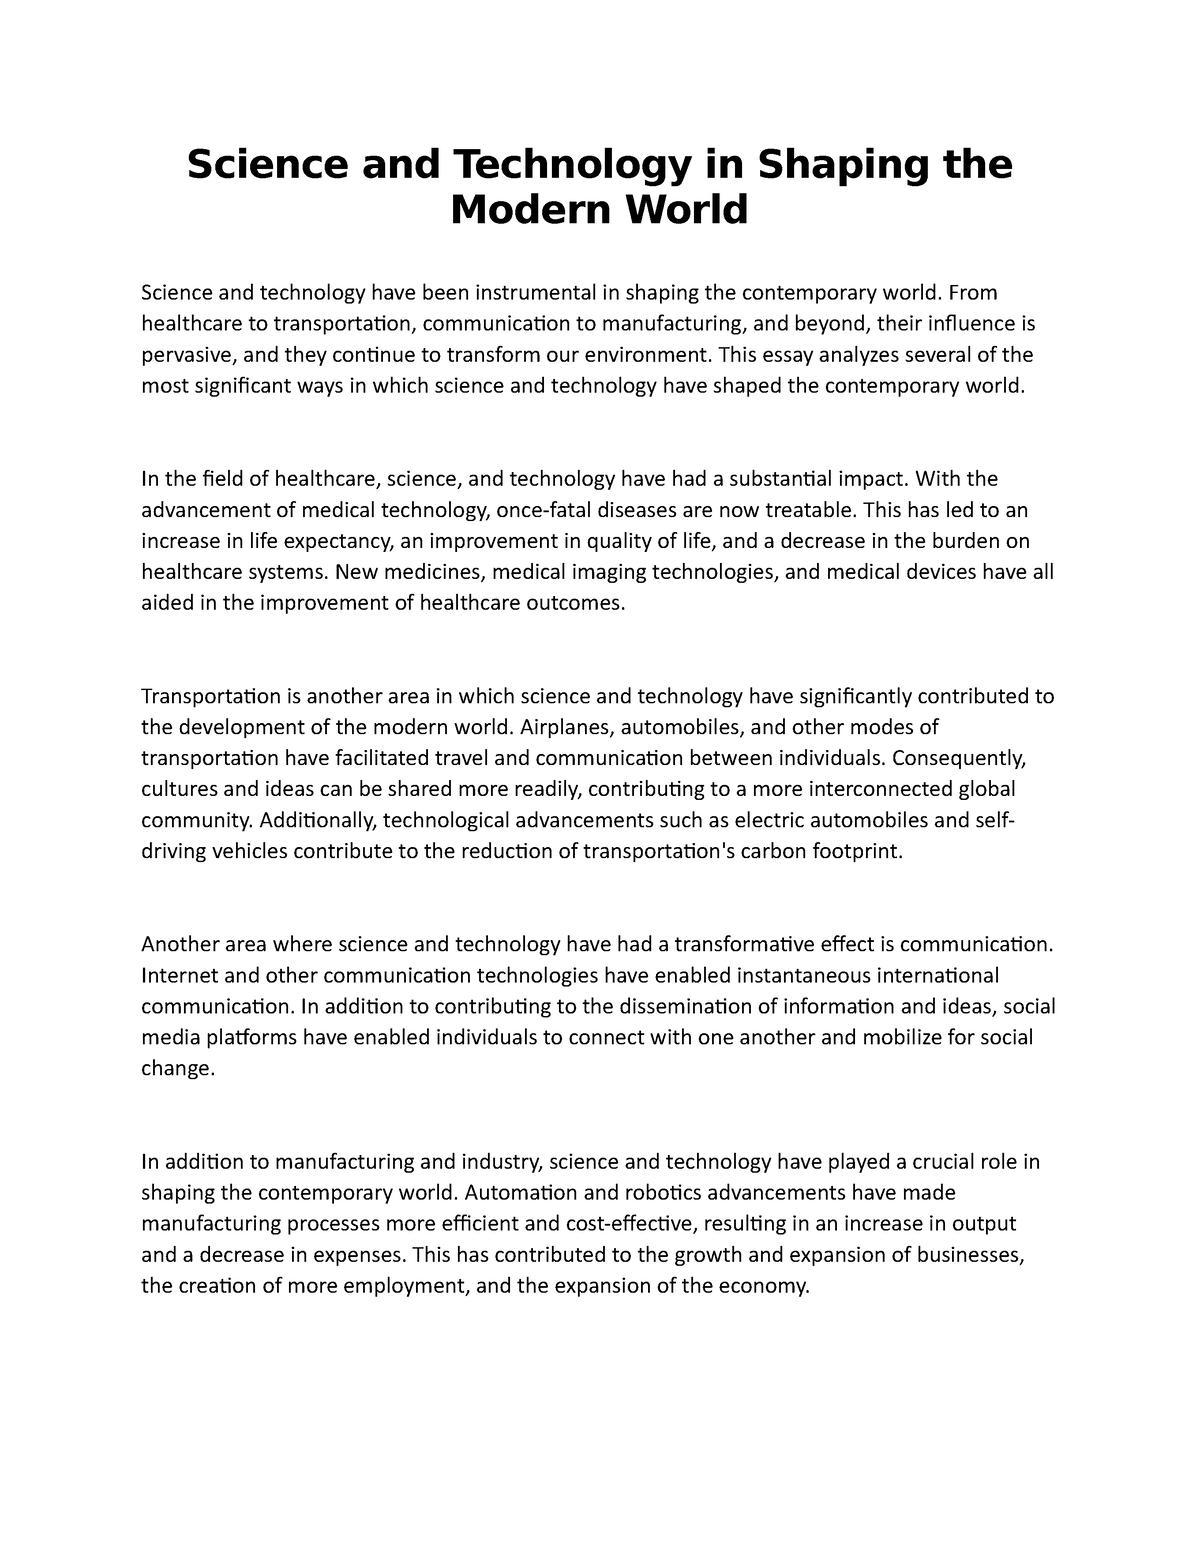 science and modern world essay